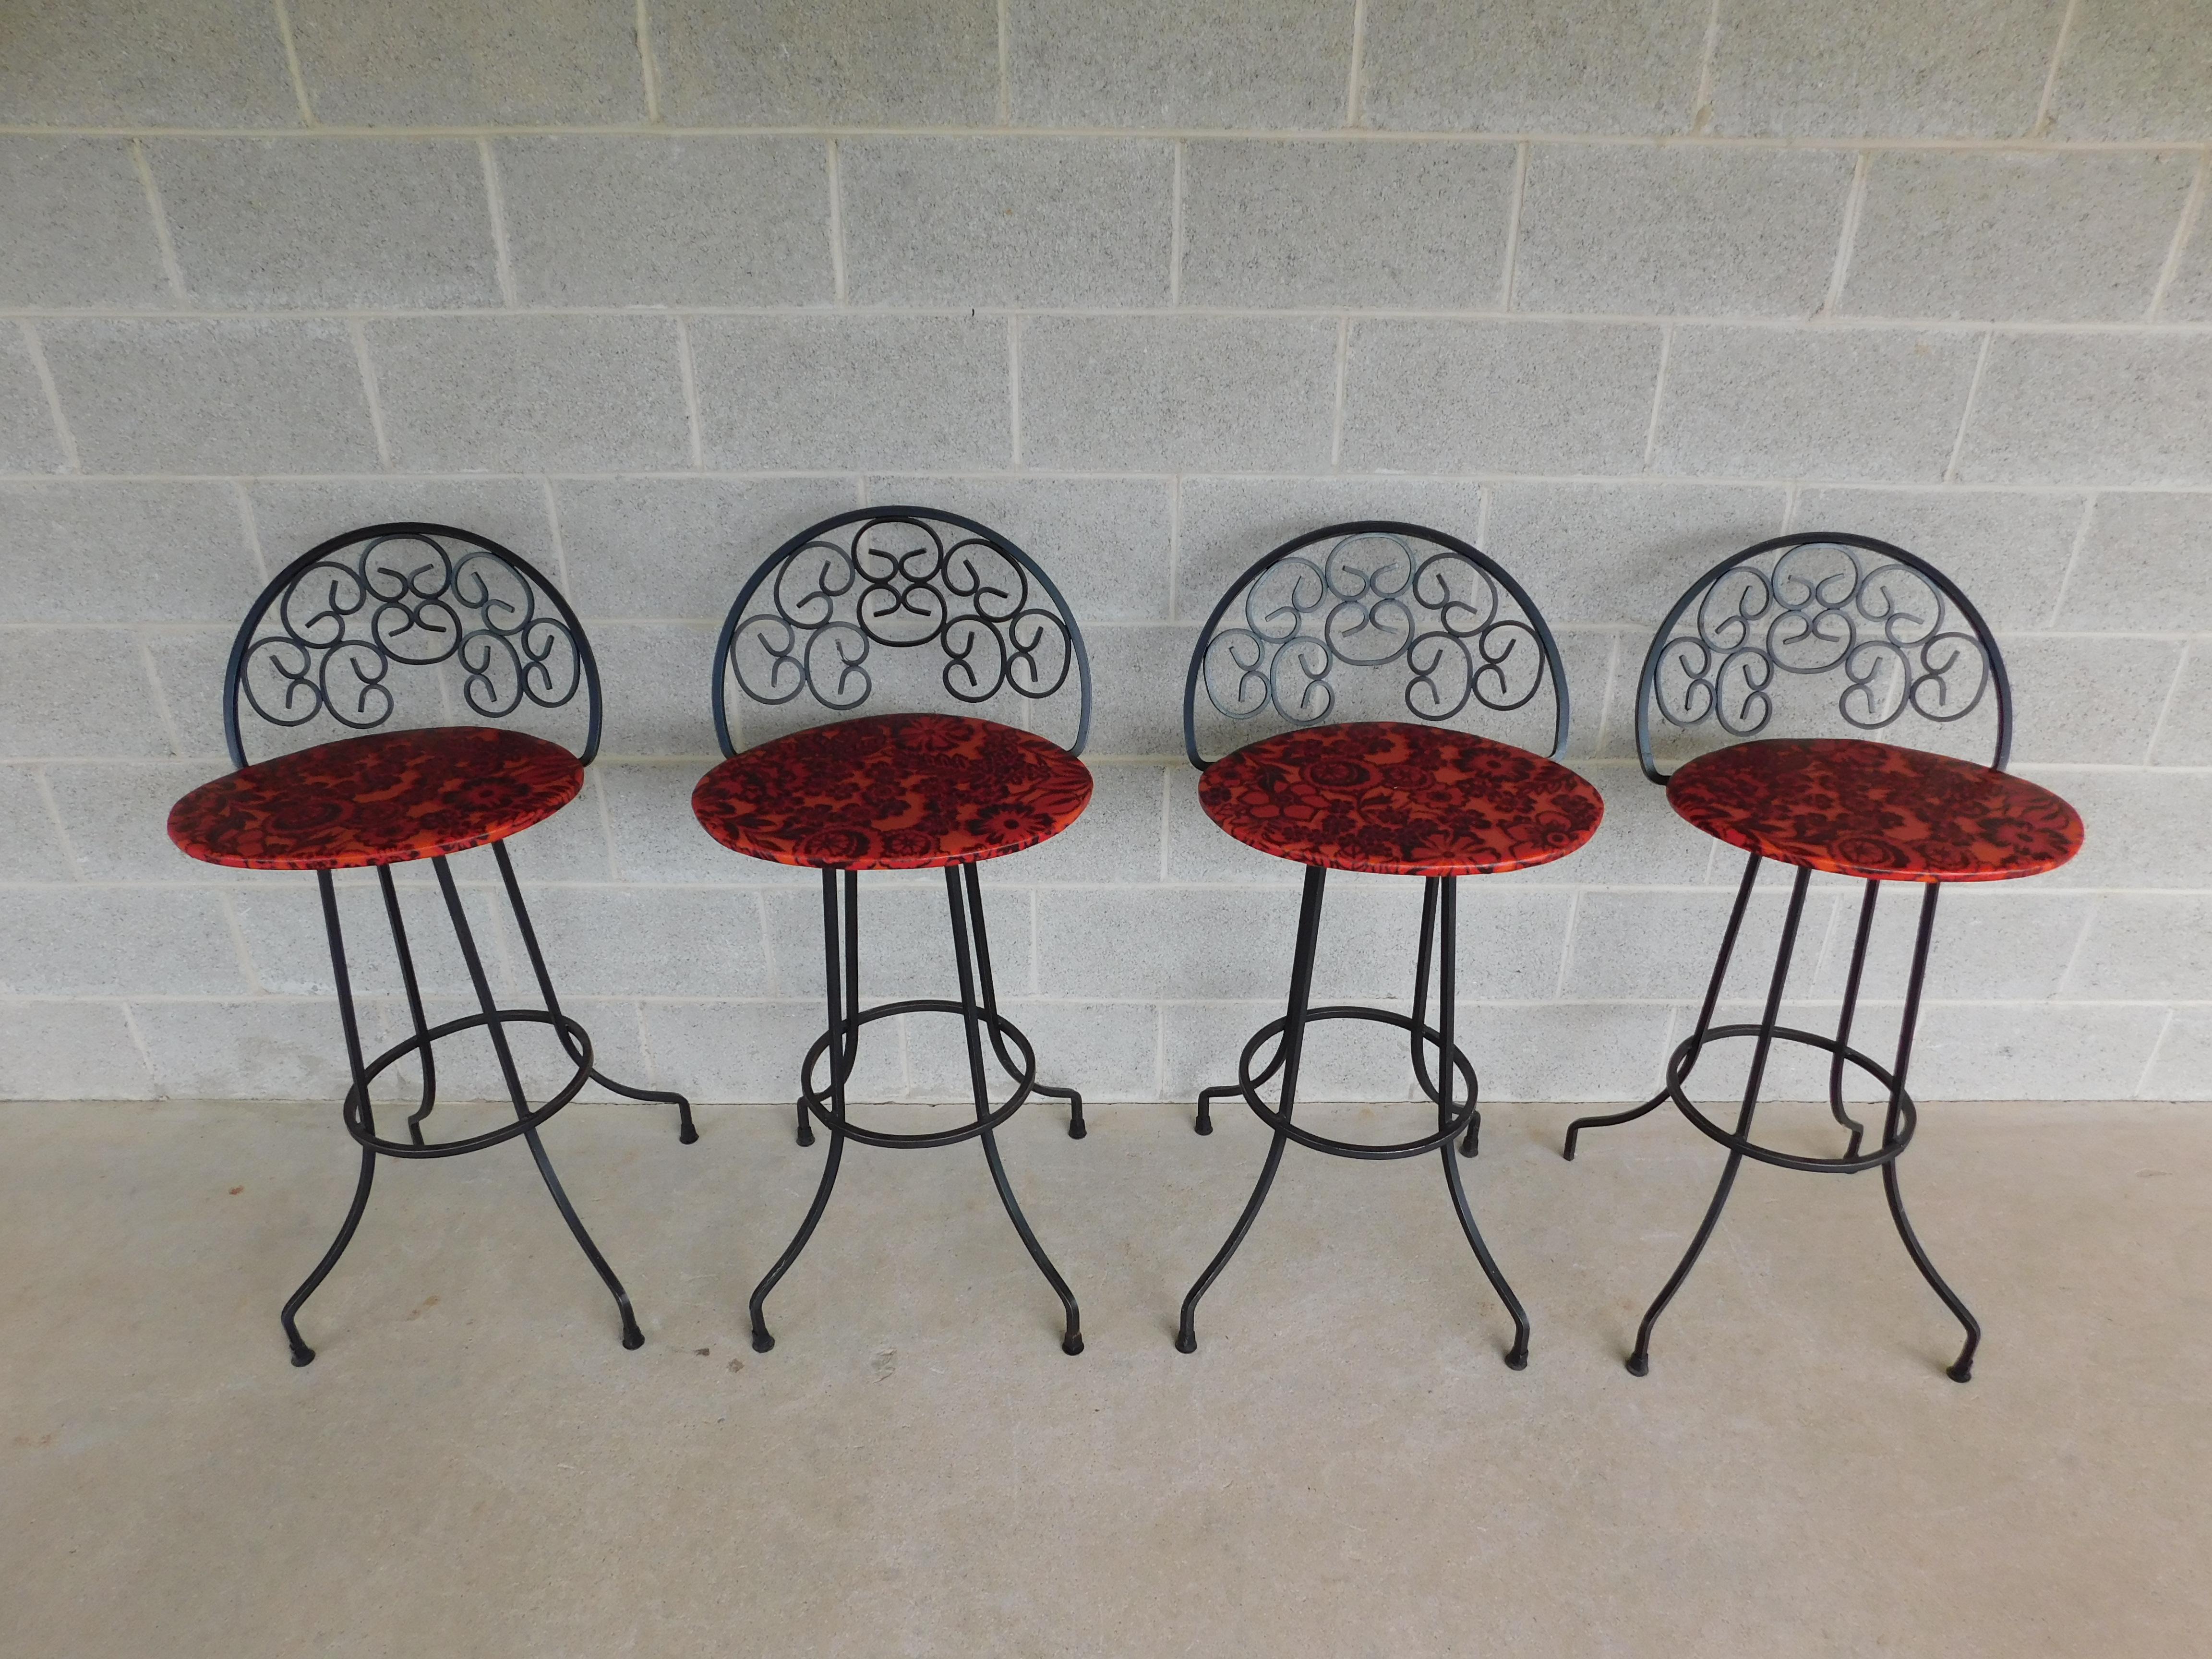 Vintage Mid-Century Wrought Iron Bar Stools Attributed to Authur Umanuff - Set of 4

360 Degree Full Swivel, Vinyl Fabric Seat Covering, welded construction.

Back Height 39